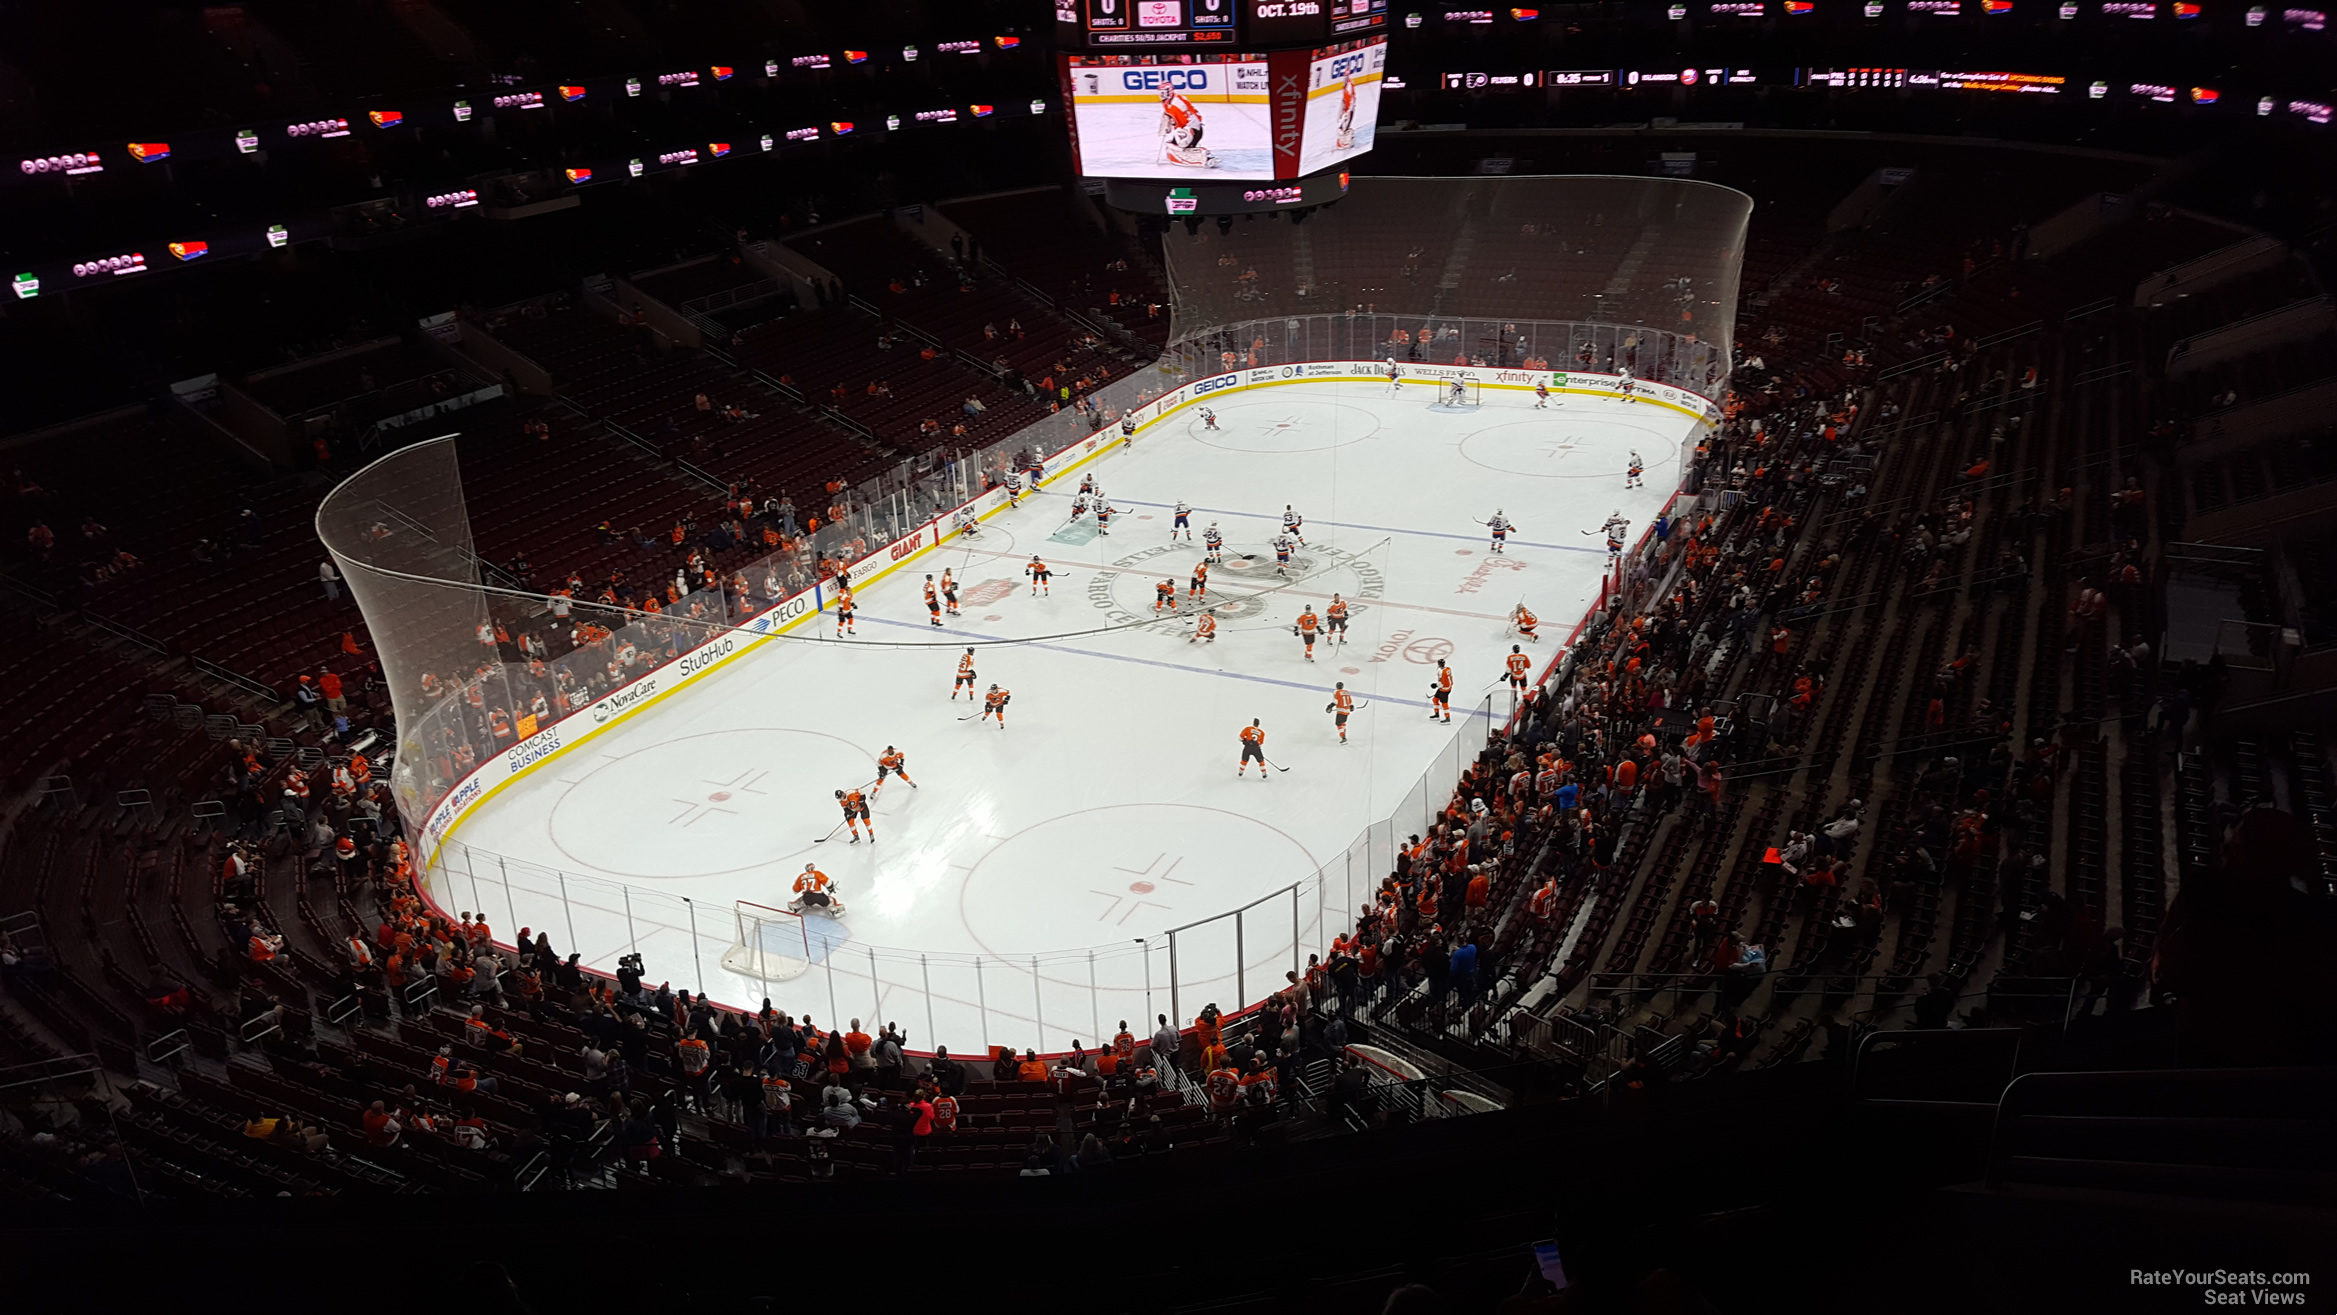 section 221, row 8 seat view  for hockey - wells fargo center